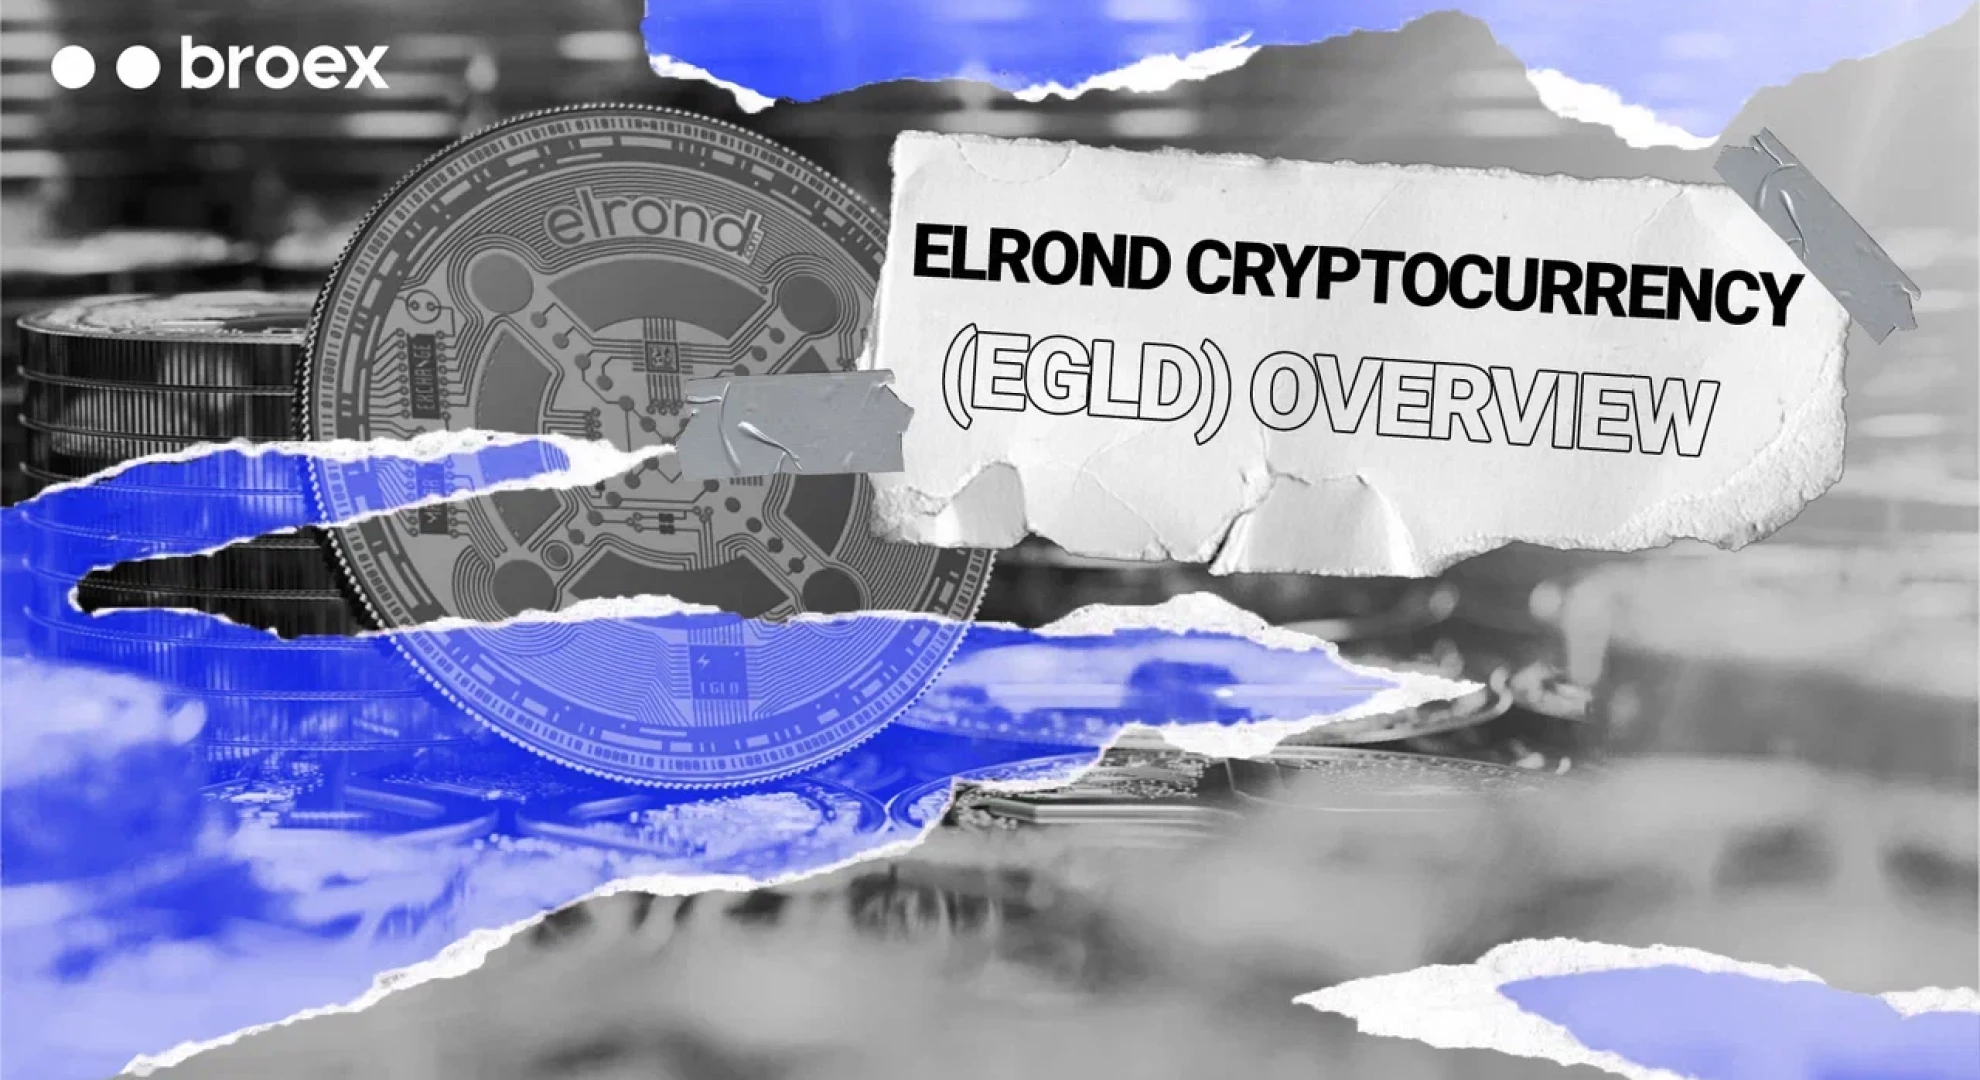 Elrond Cryptocurrency (eGLD)